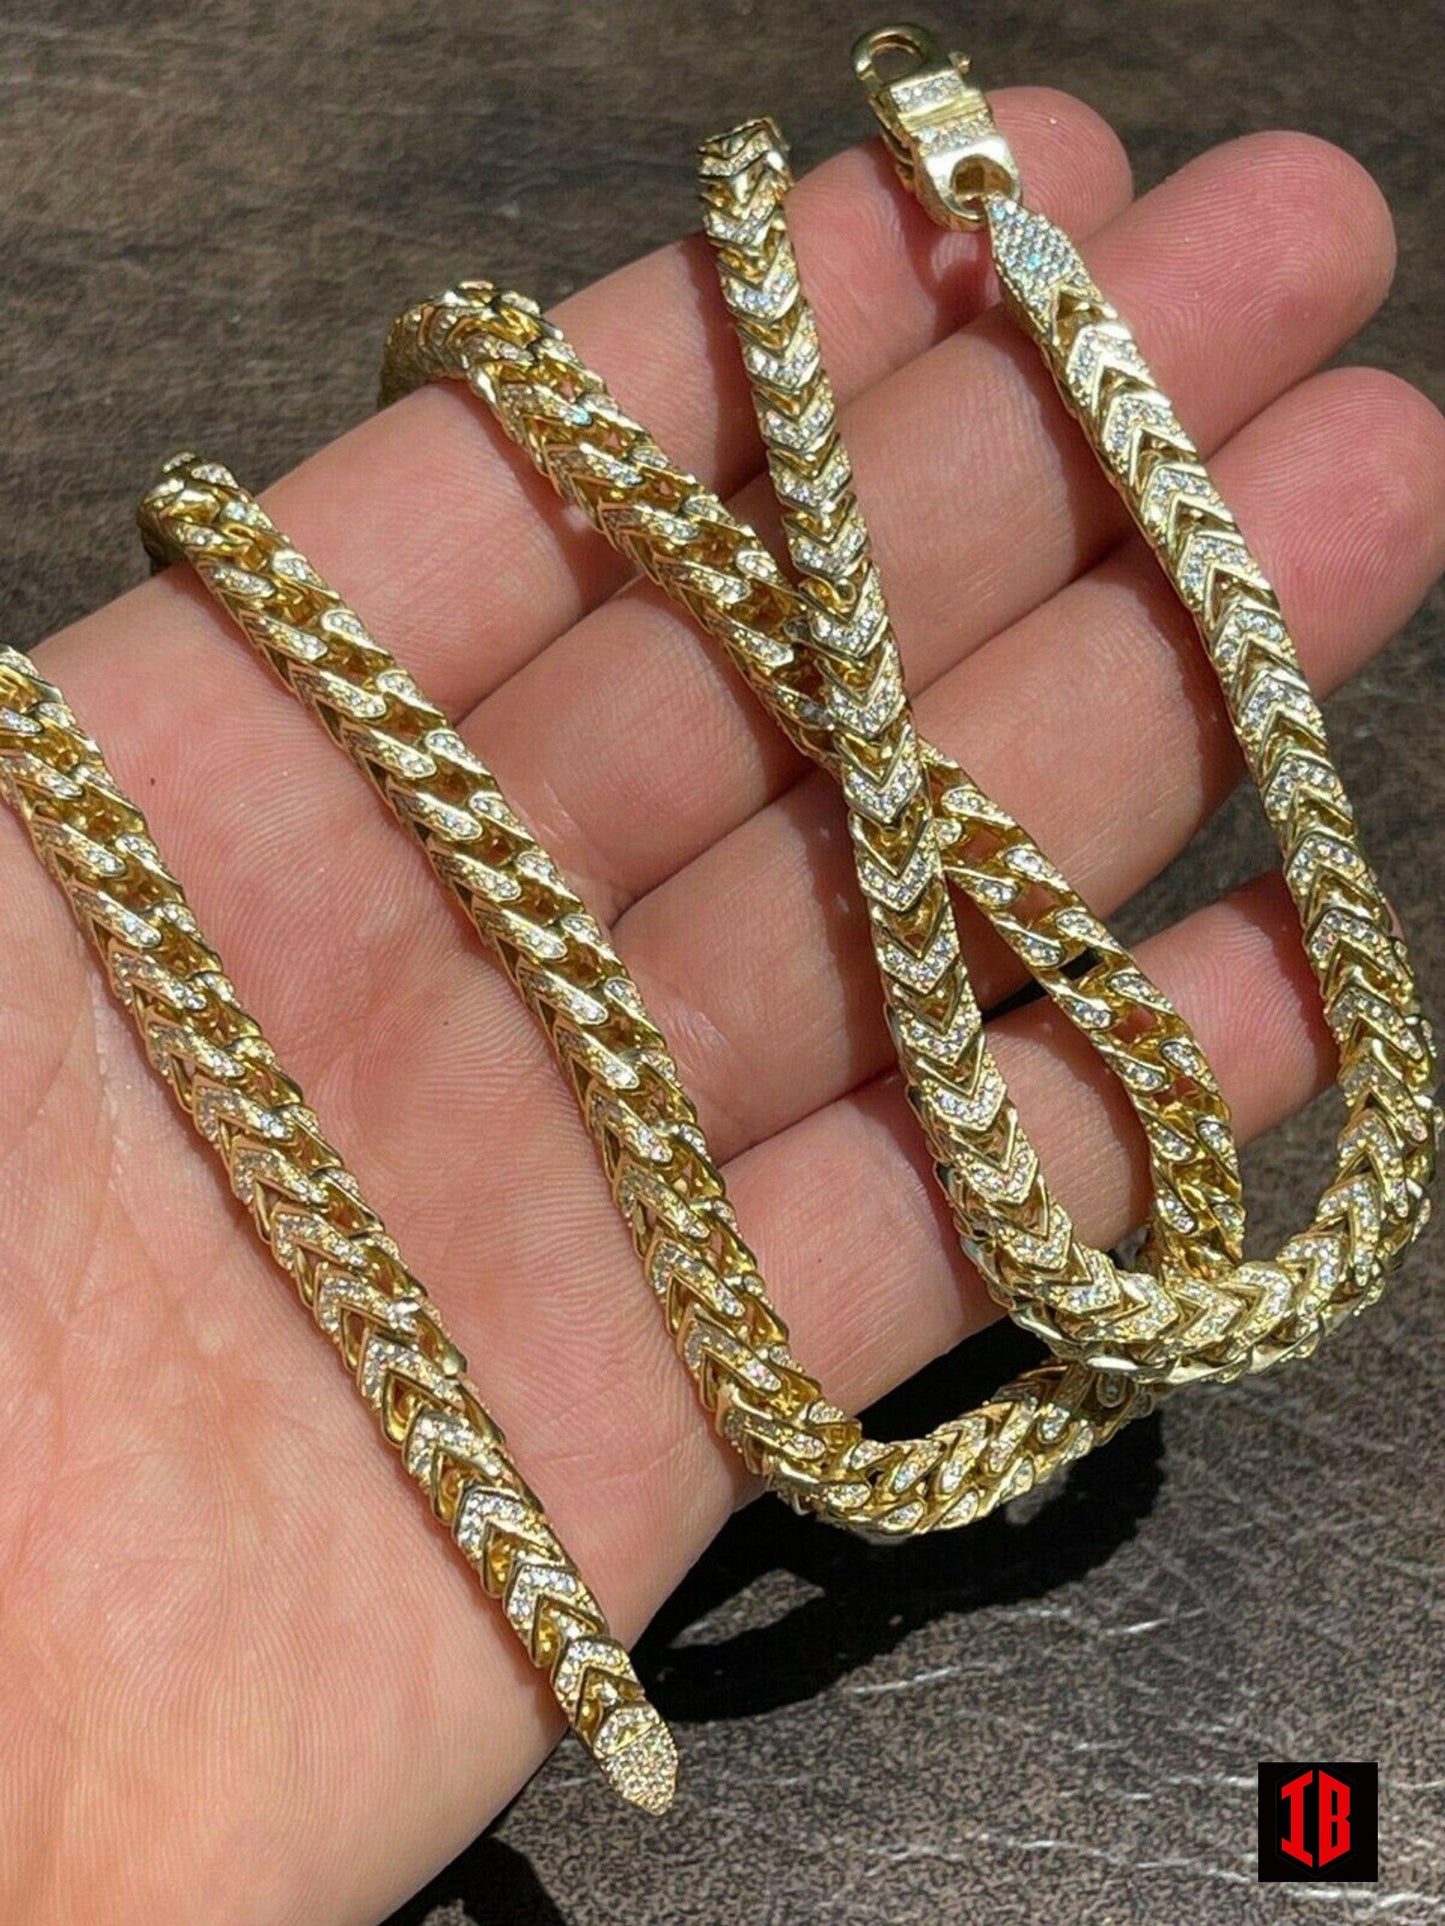 14k YELLOW Gold Over Real 925 Silver Men's Franco Chain 6mm Thick ICED Diamond 18-30"